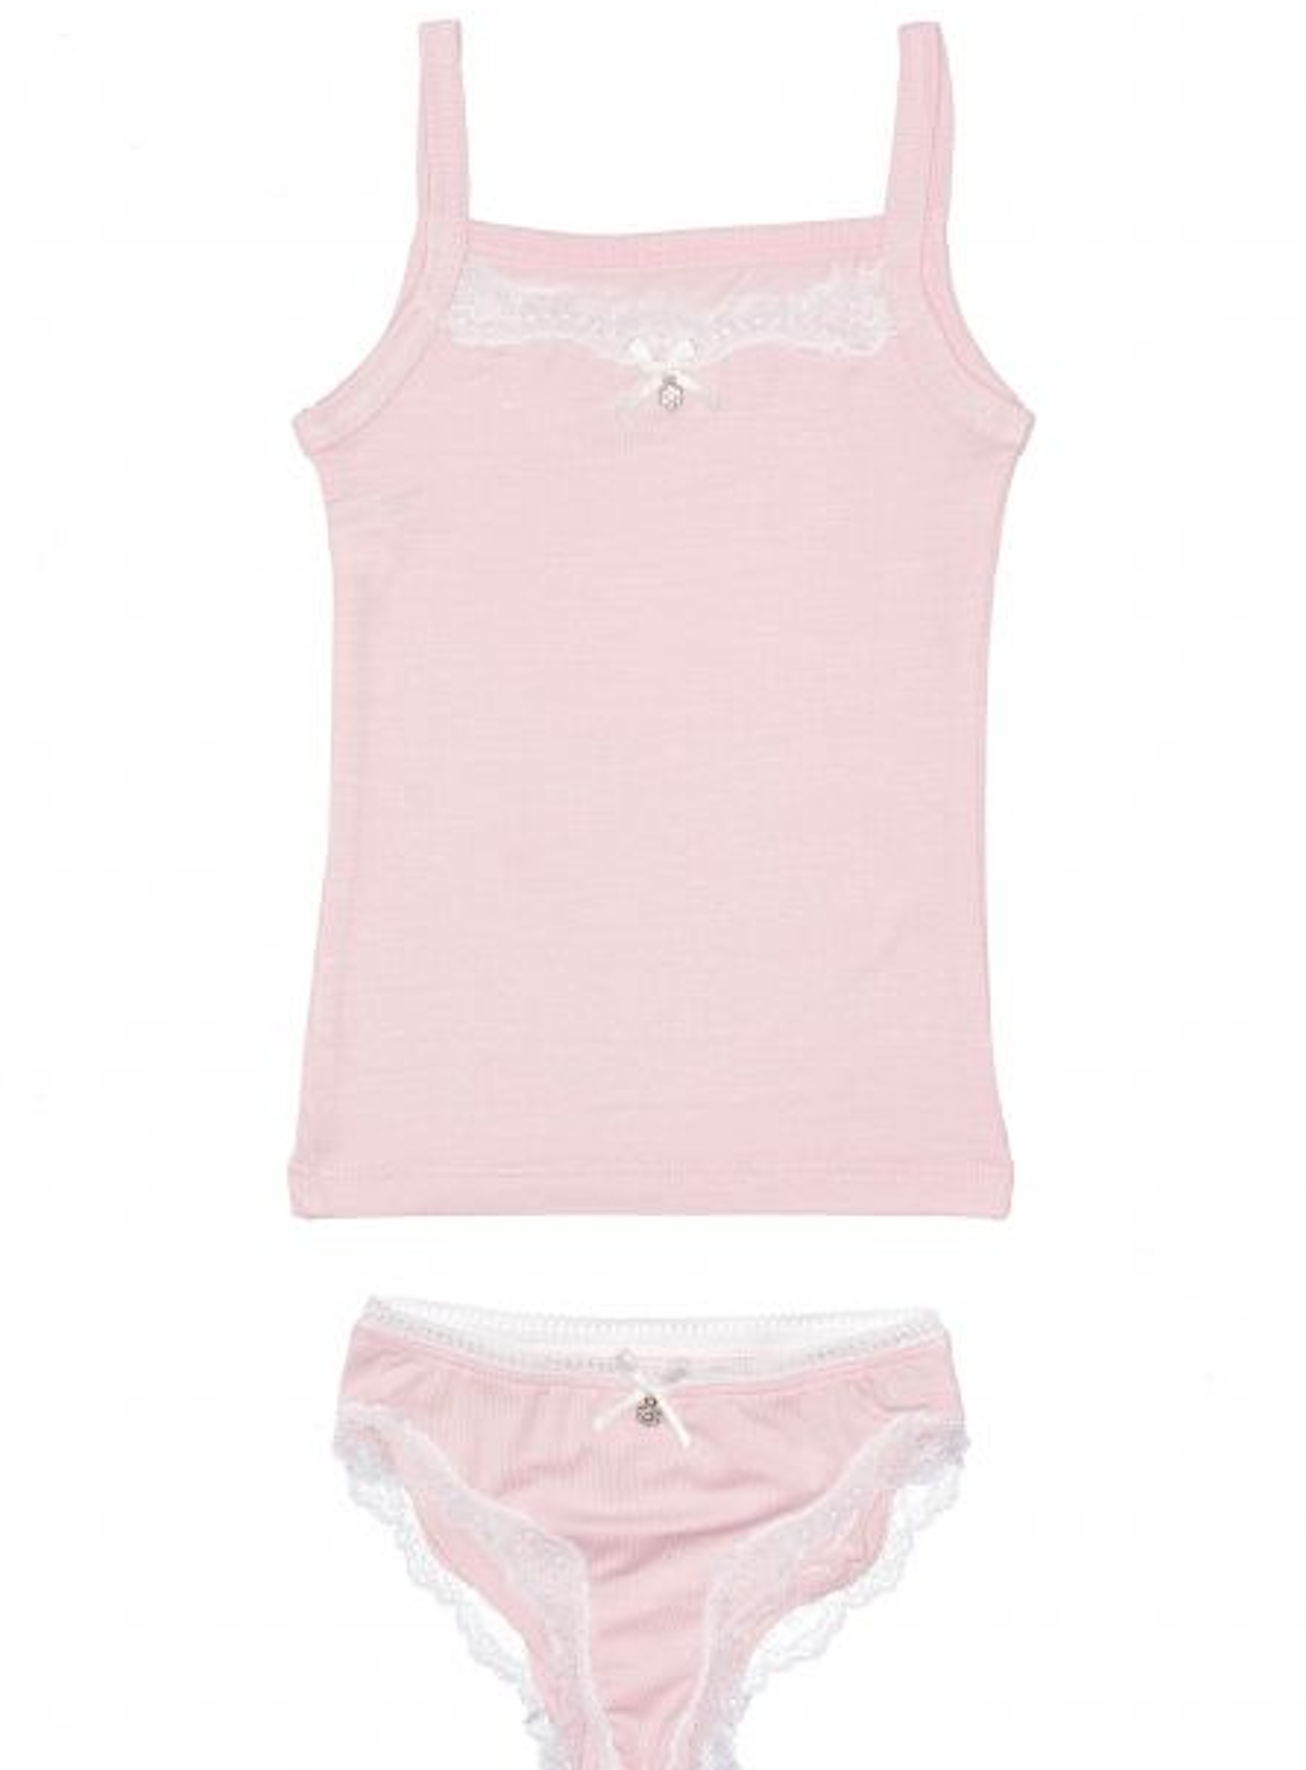 Lace Trim Camisole and Panty Set, Micromodal